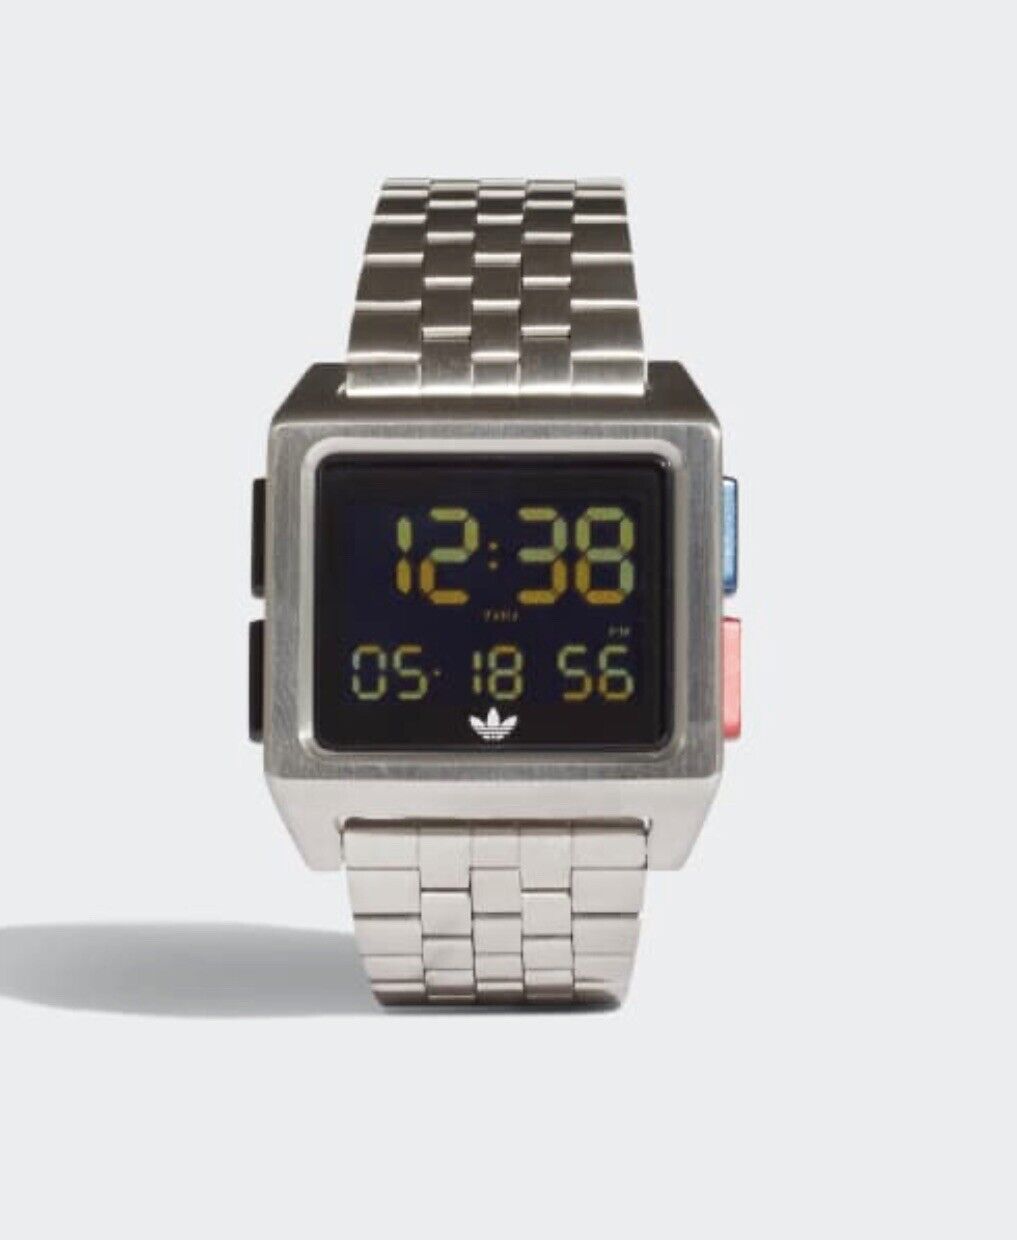 NEW Adidas Archive M1 CJ6307 Silver Stainless-Steel Quart Watch 